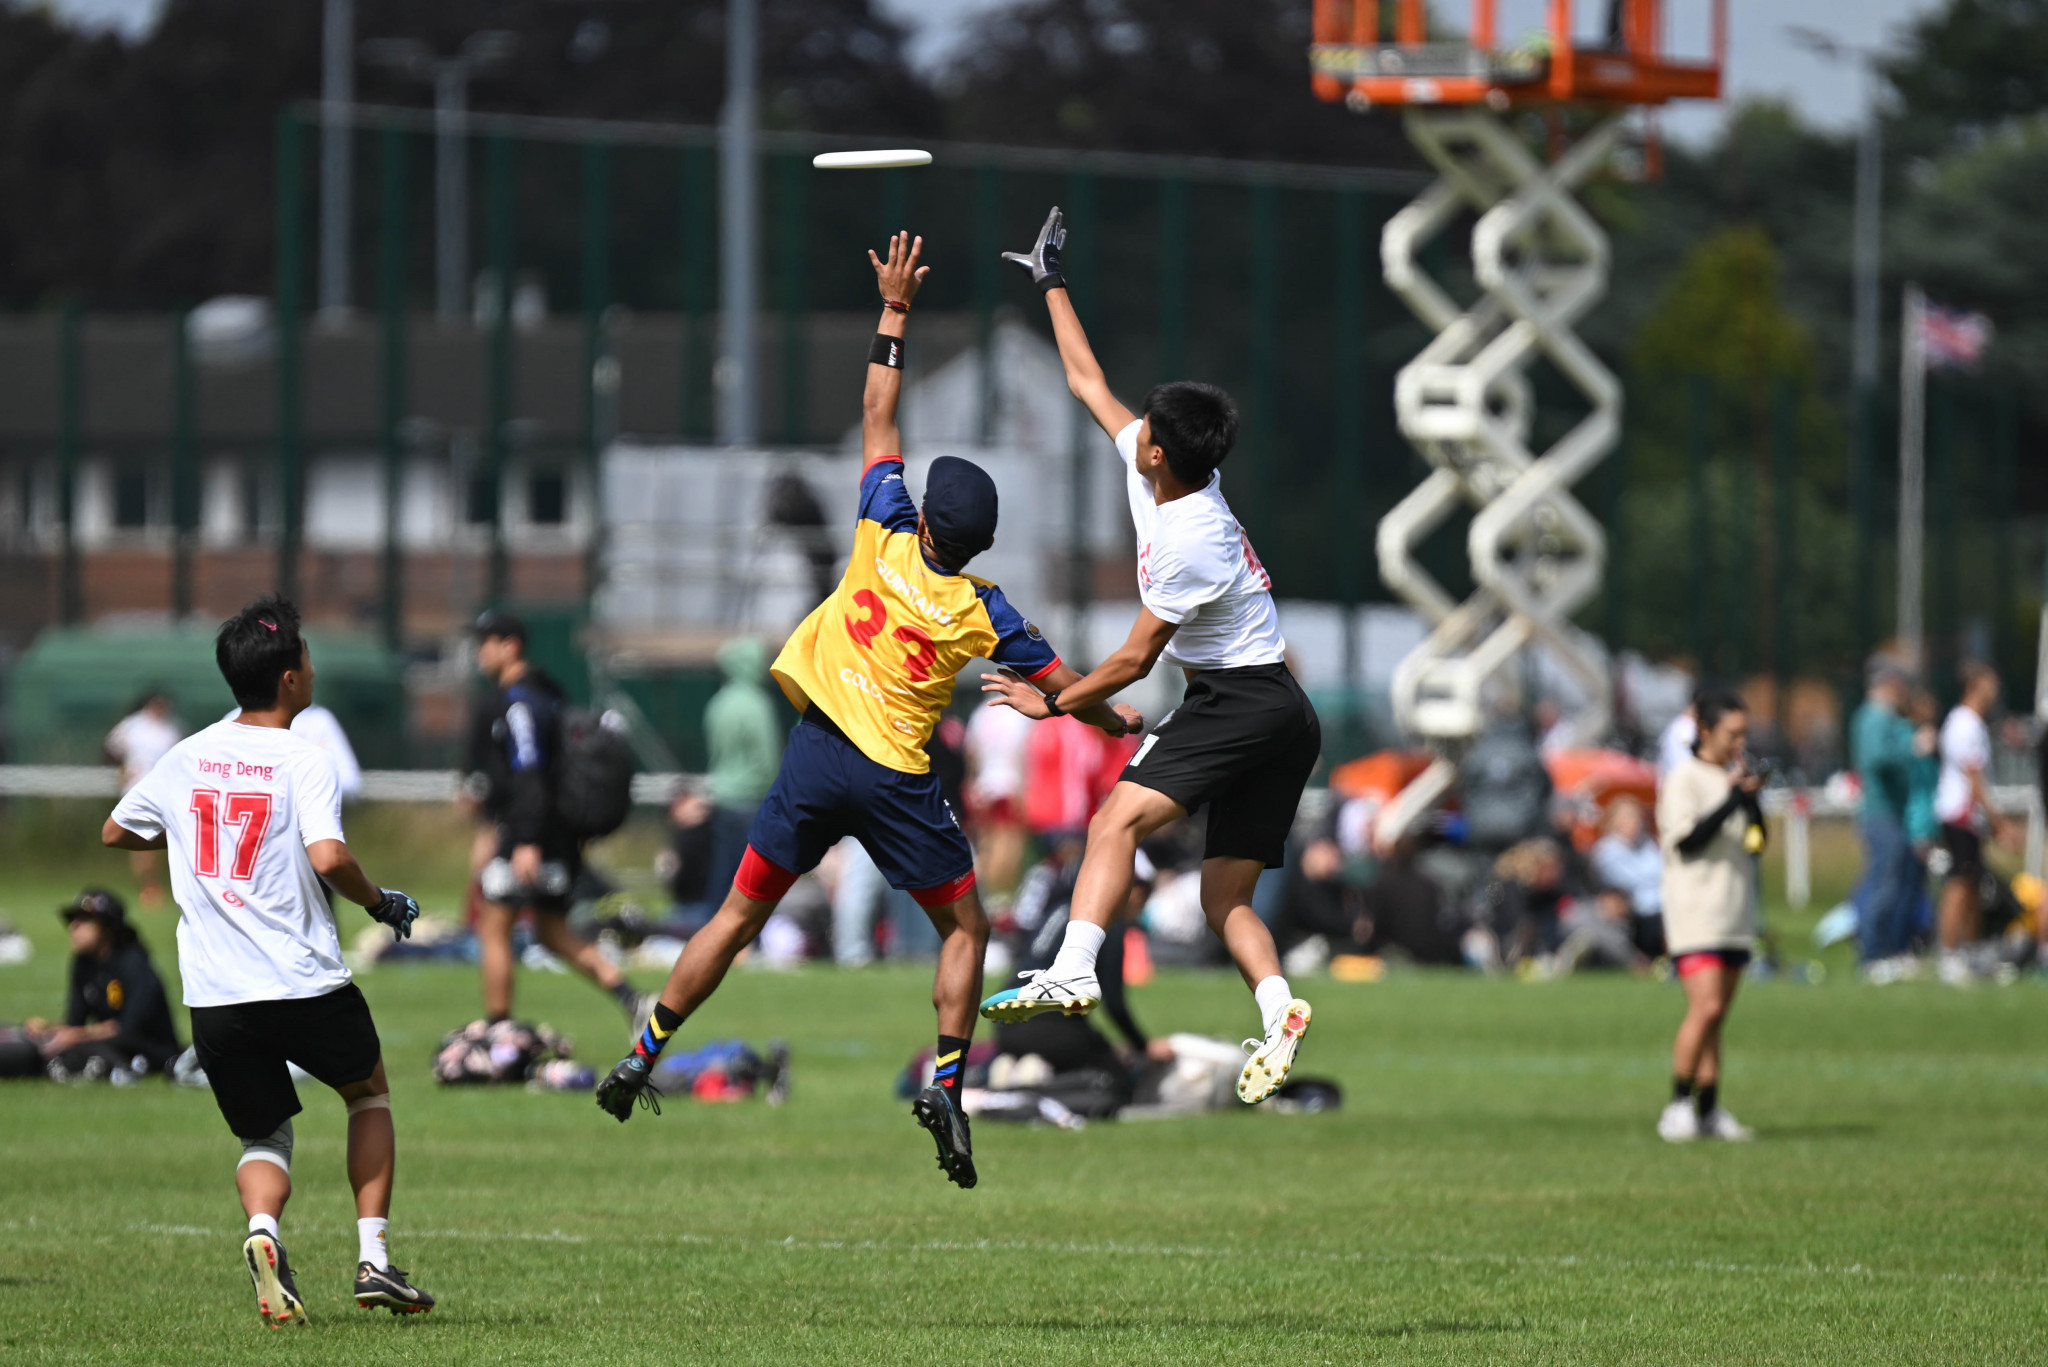 Flying disc players reach for the disc during an entertaining opening day of competition in Nottingham ©WFDF